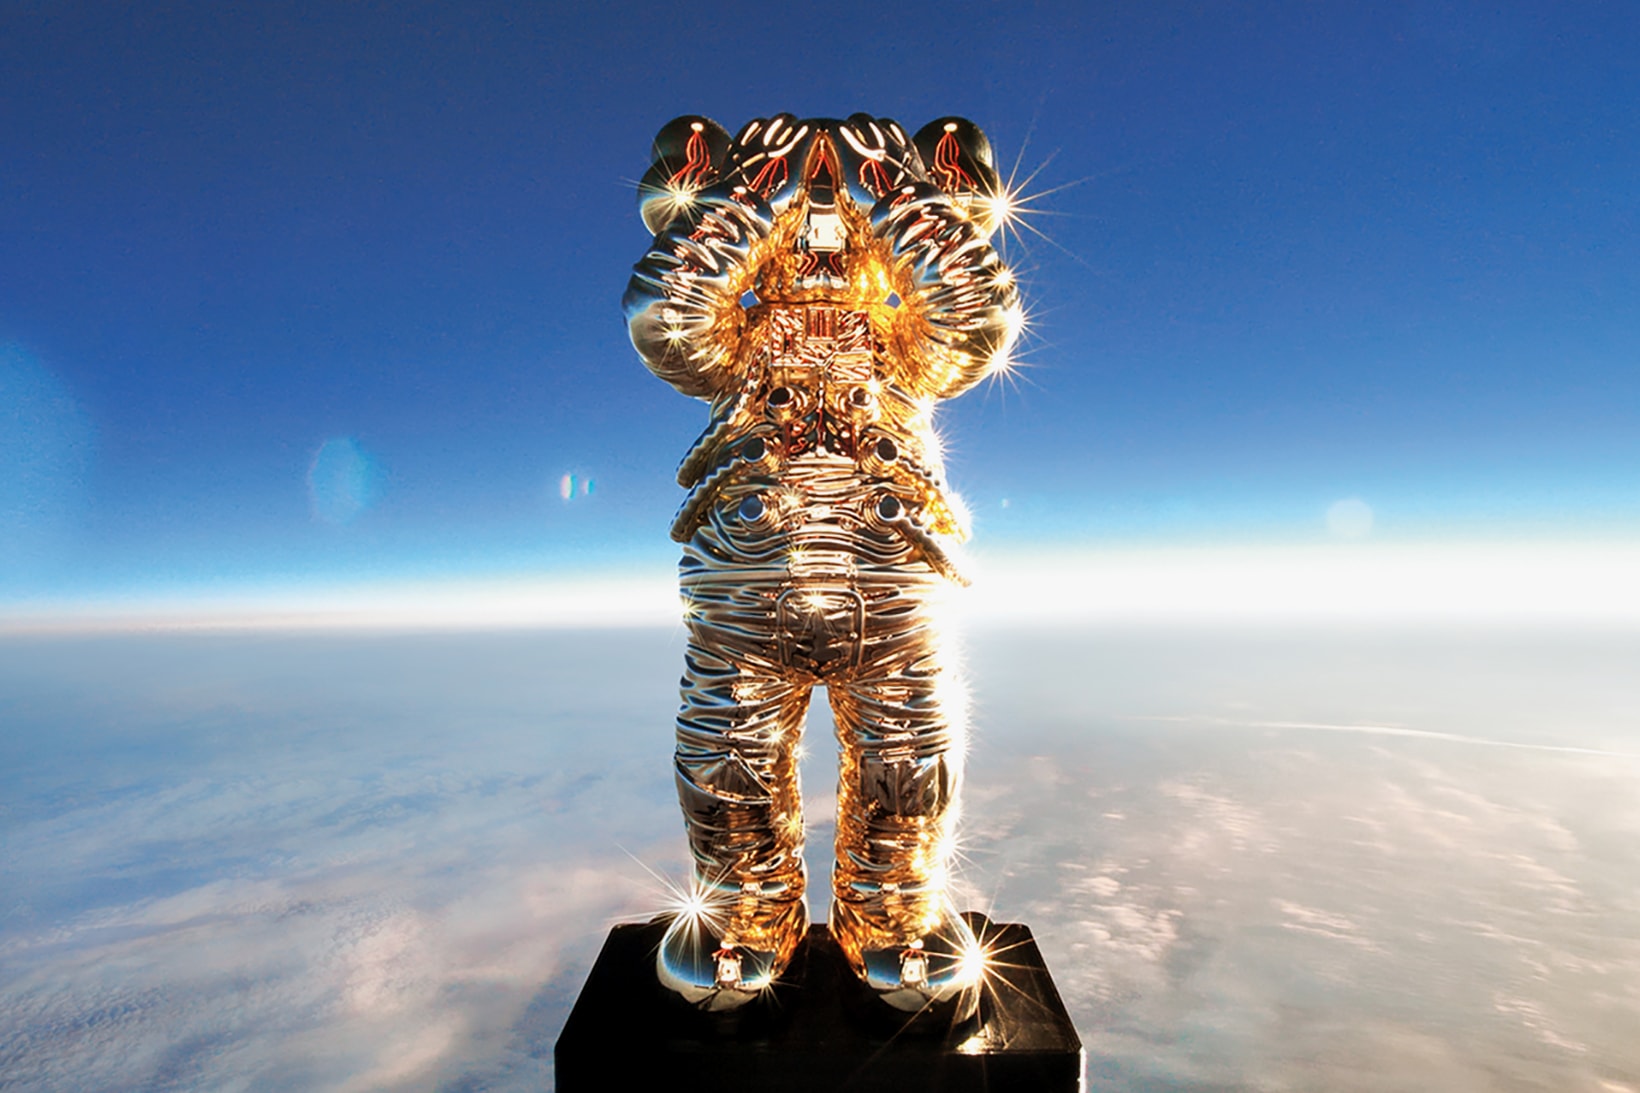 kaws holiday space allrightsreserved collaboration companion figure collectibles gold sculpture 